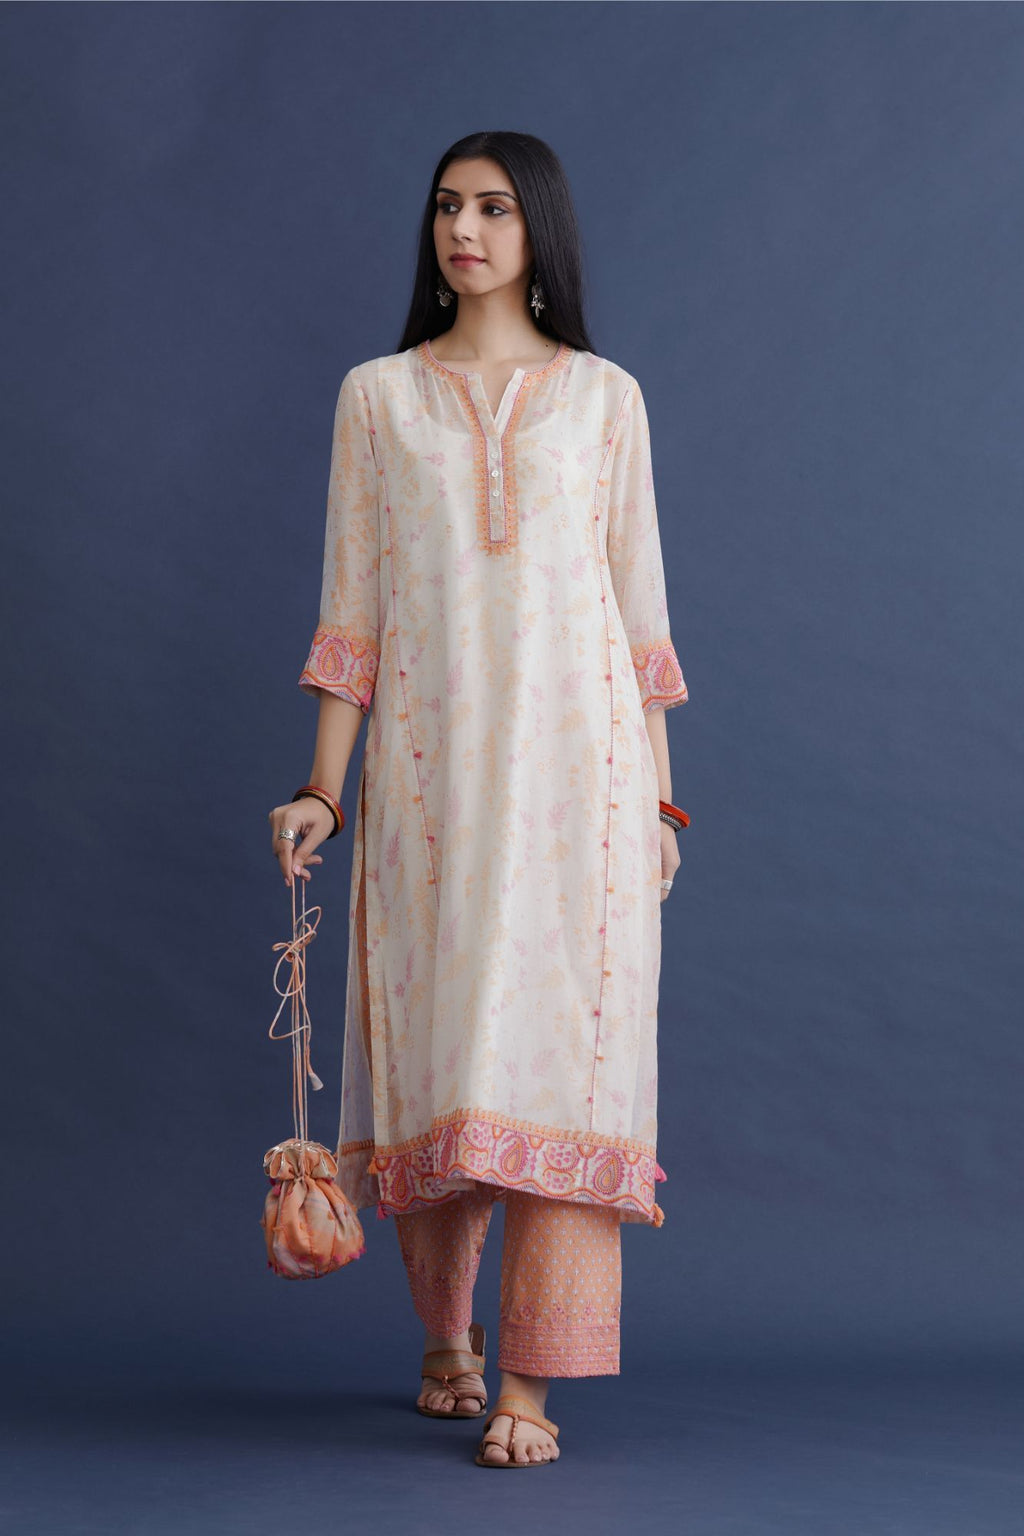 Off white straight kurta set with embroidered button placket neckline and delicate bead and tassel embroidery at side panel joint seams